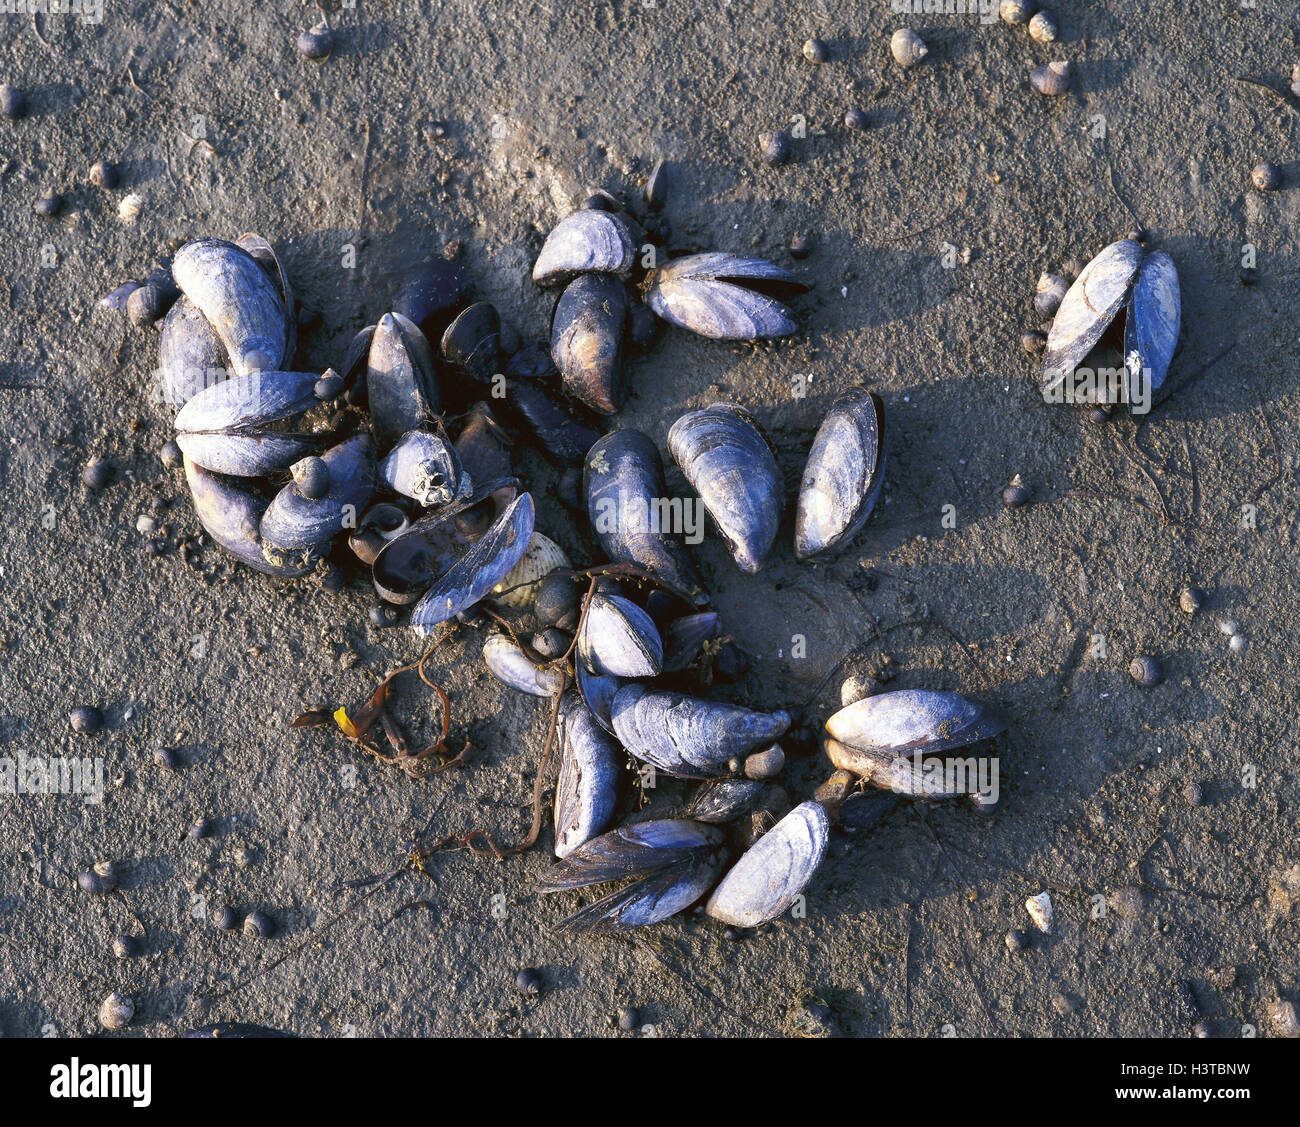 Beach, mussels escargots flotsam and jetsam, shells, mussels, Mytilus edulis, eatable, living beings, sea animals, sea, tides, low tide, nature, Stock Photo